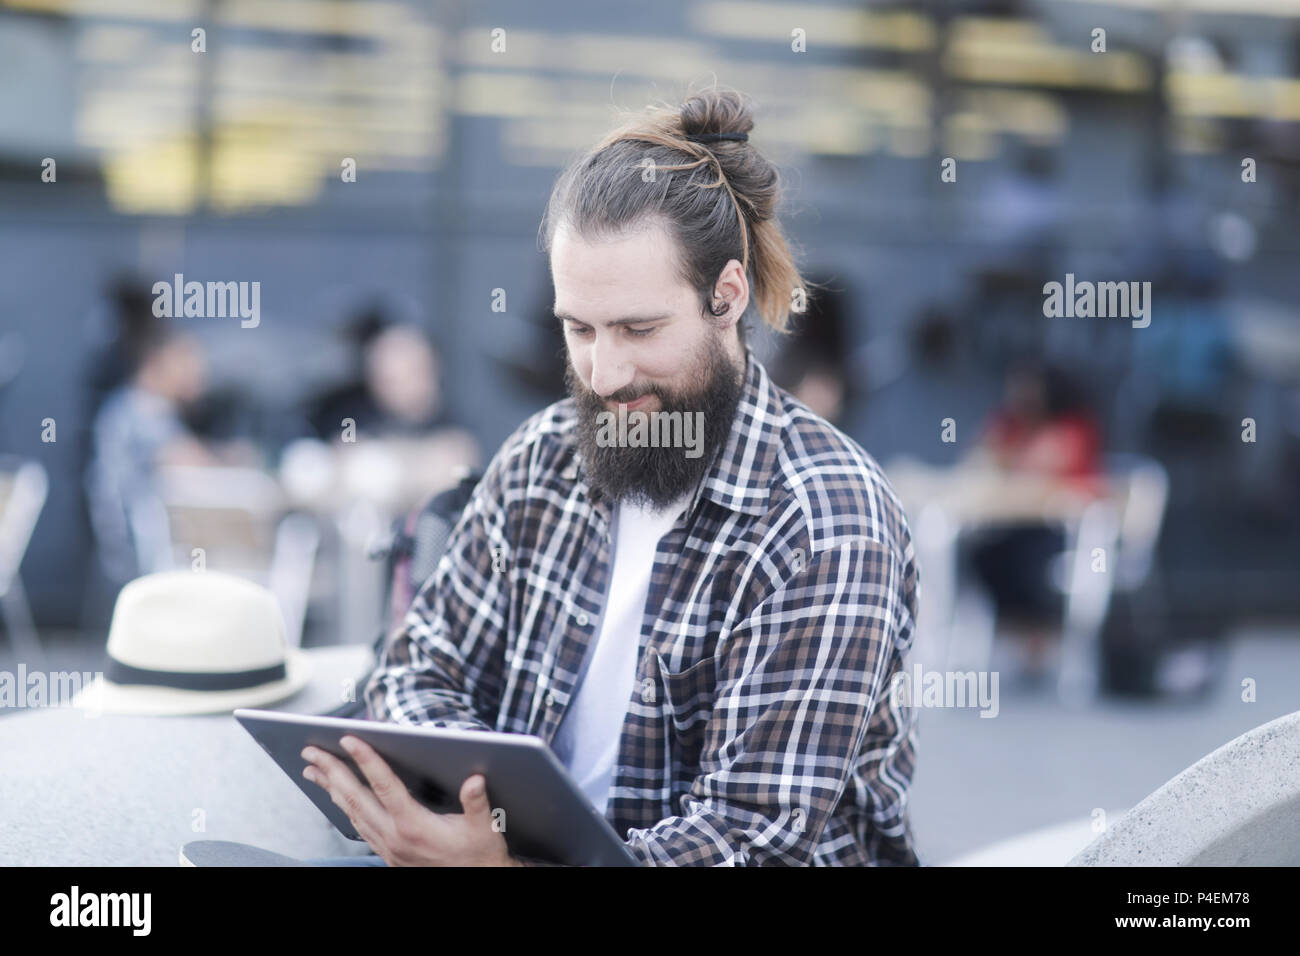 Smiling Man sitting outdoors using a digital tablet Banque D'Images